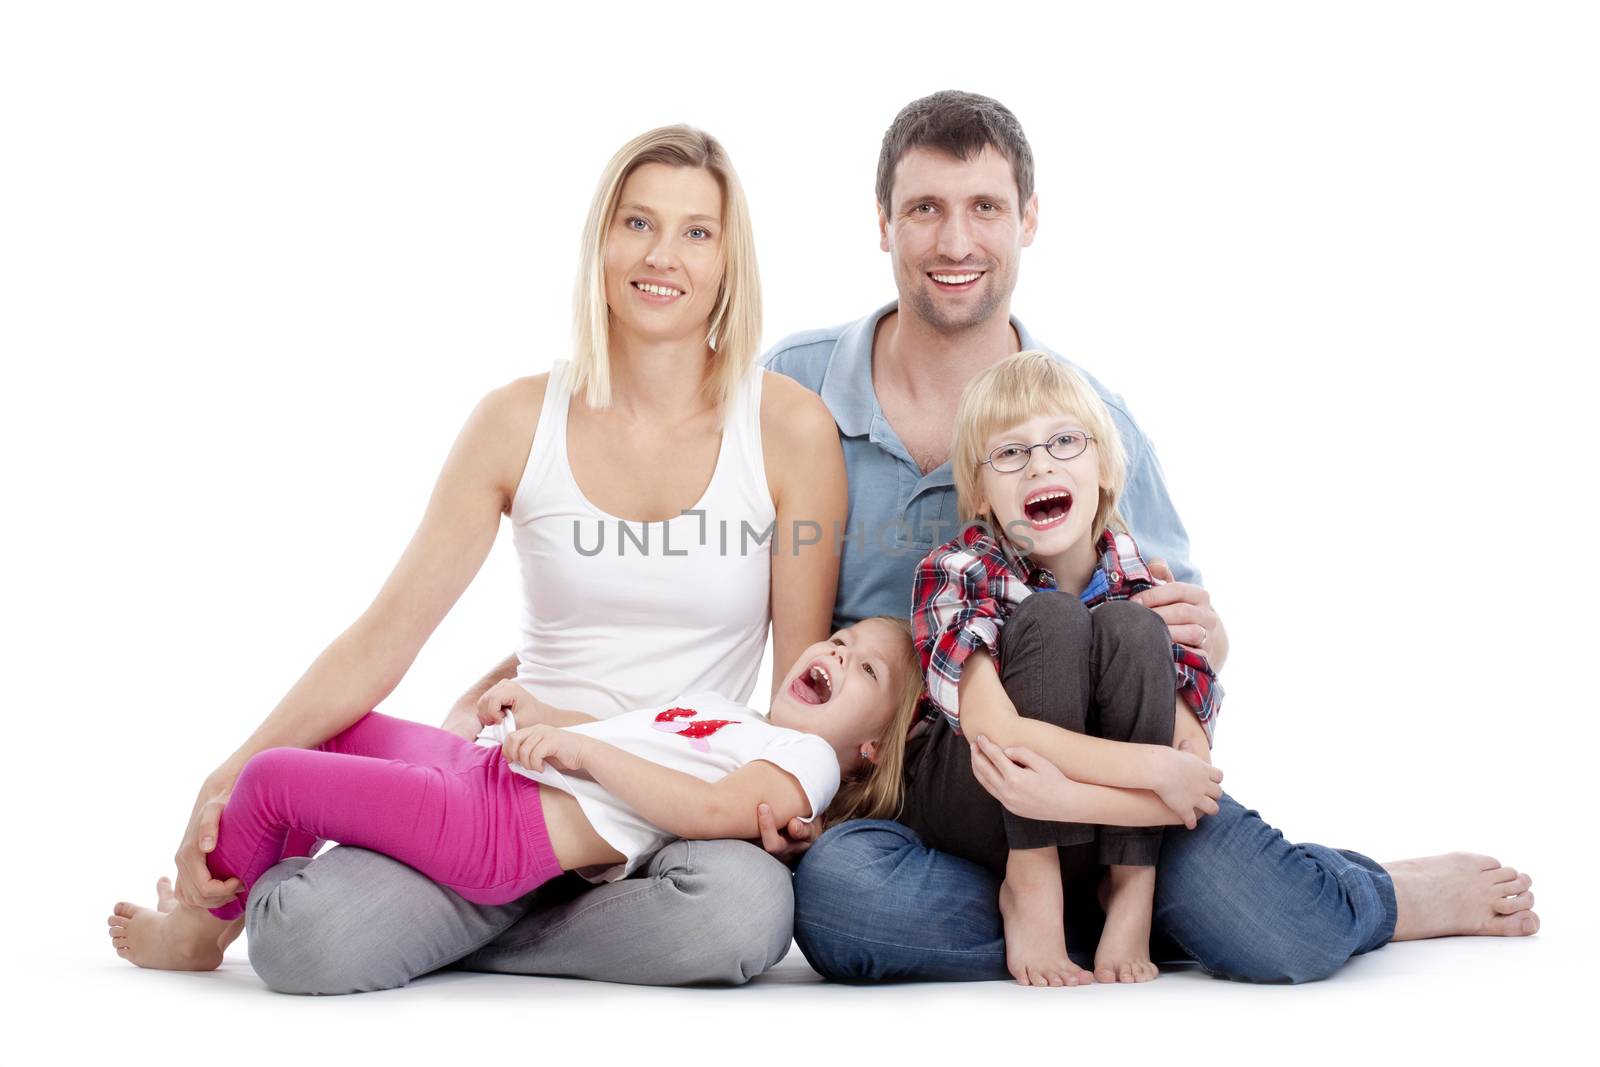 happy parents with their two children looking at the camera, smiling - isolated on white